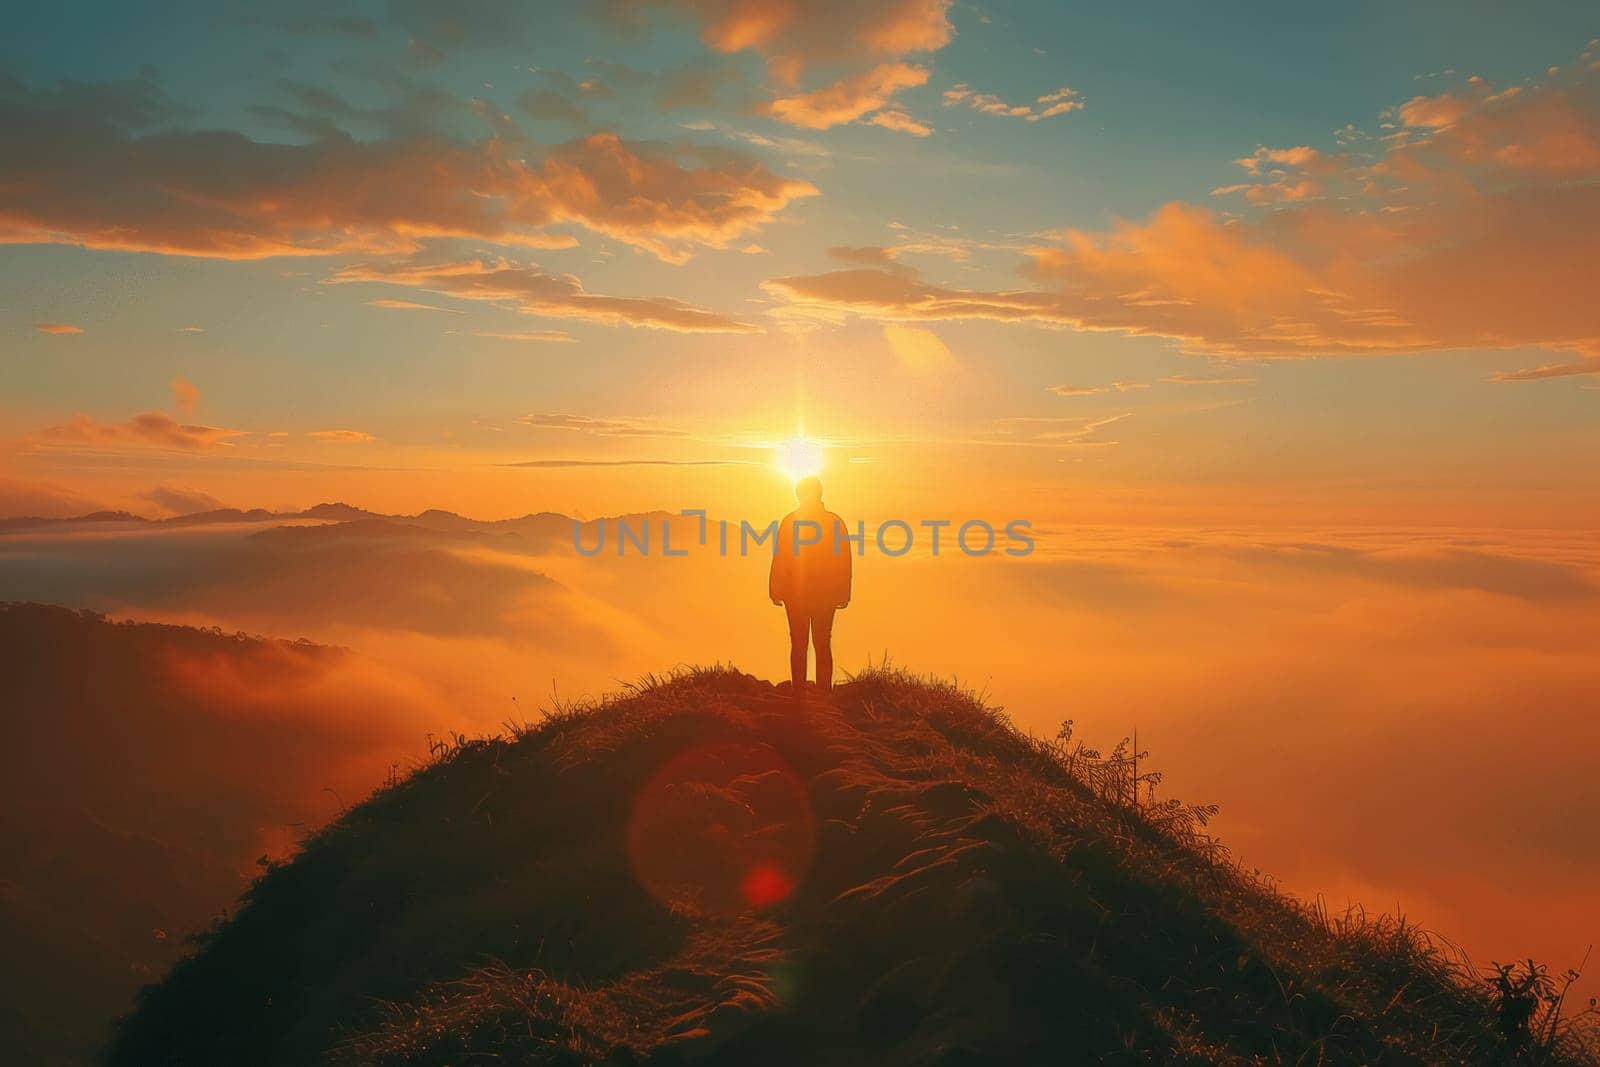 A solitary figure stands atop a hill at sunrise, symbolizing hope and the conquering of challenges